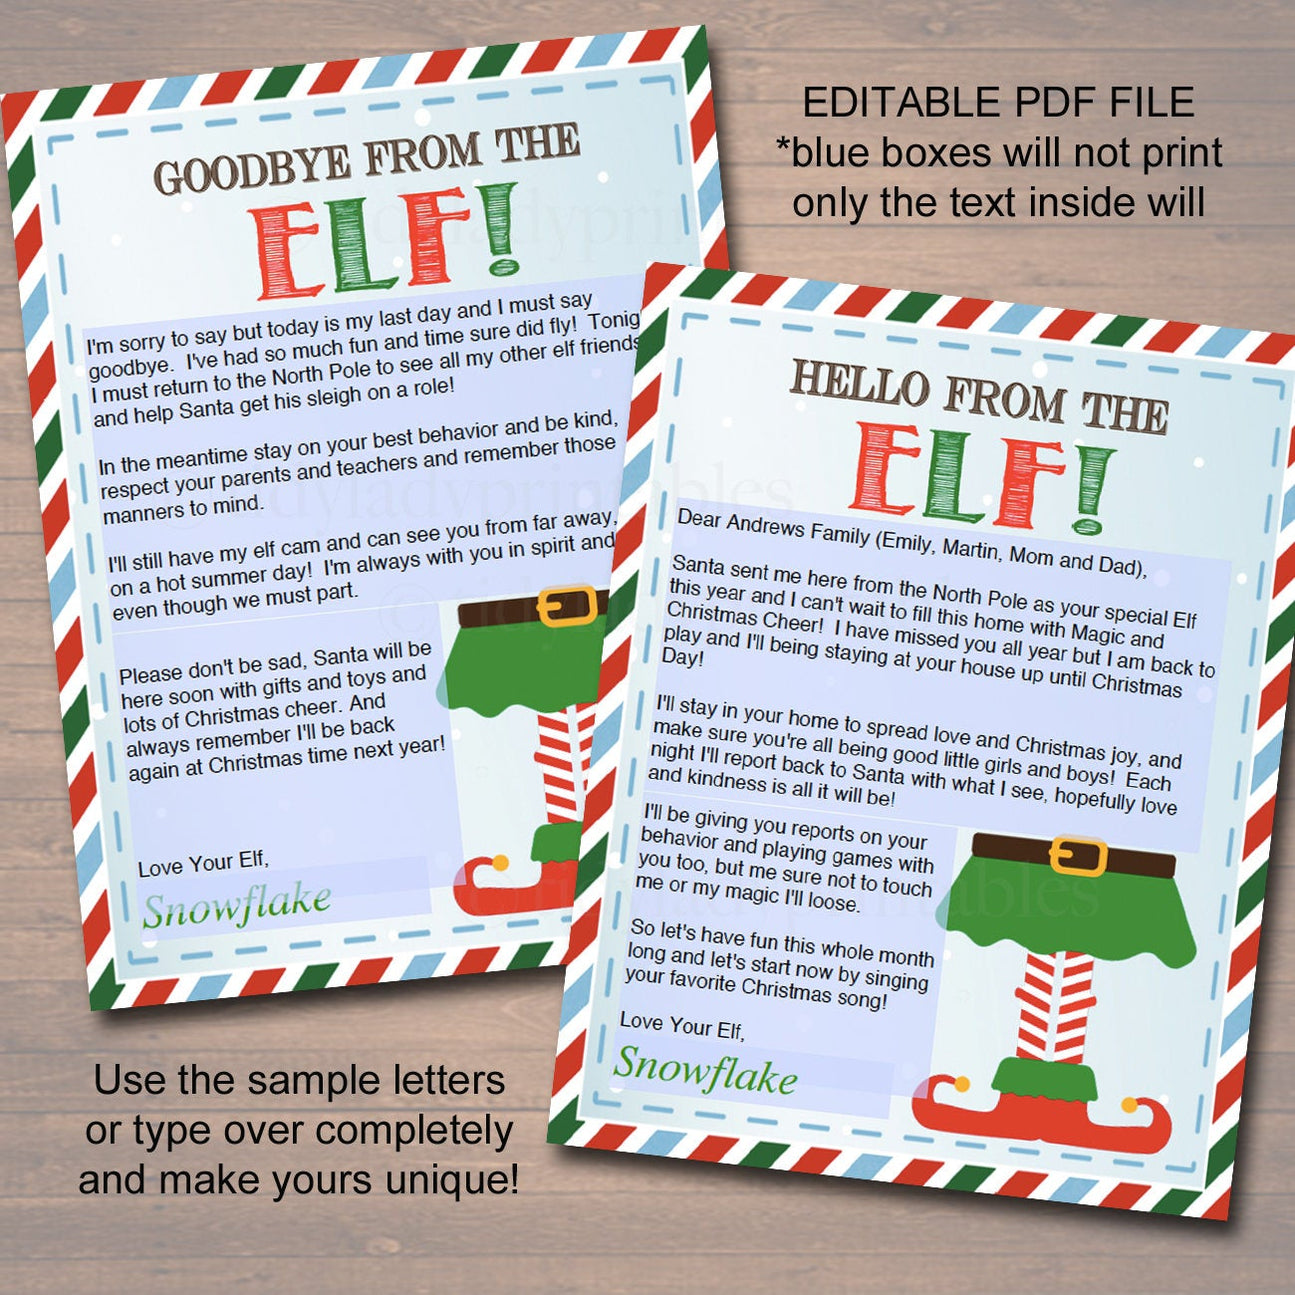 Goodbye from the Elf, Hello from the Elf Letter — TidyLady Printables